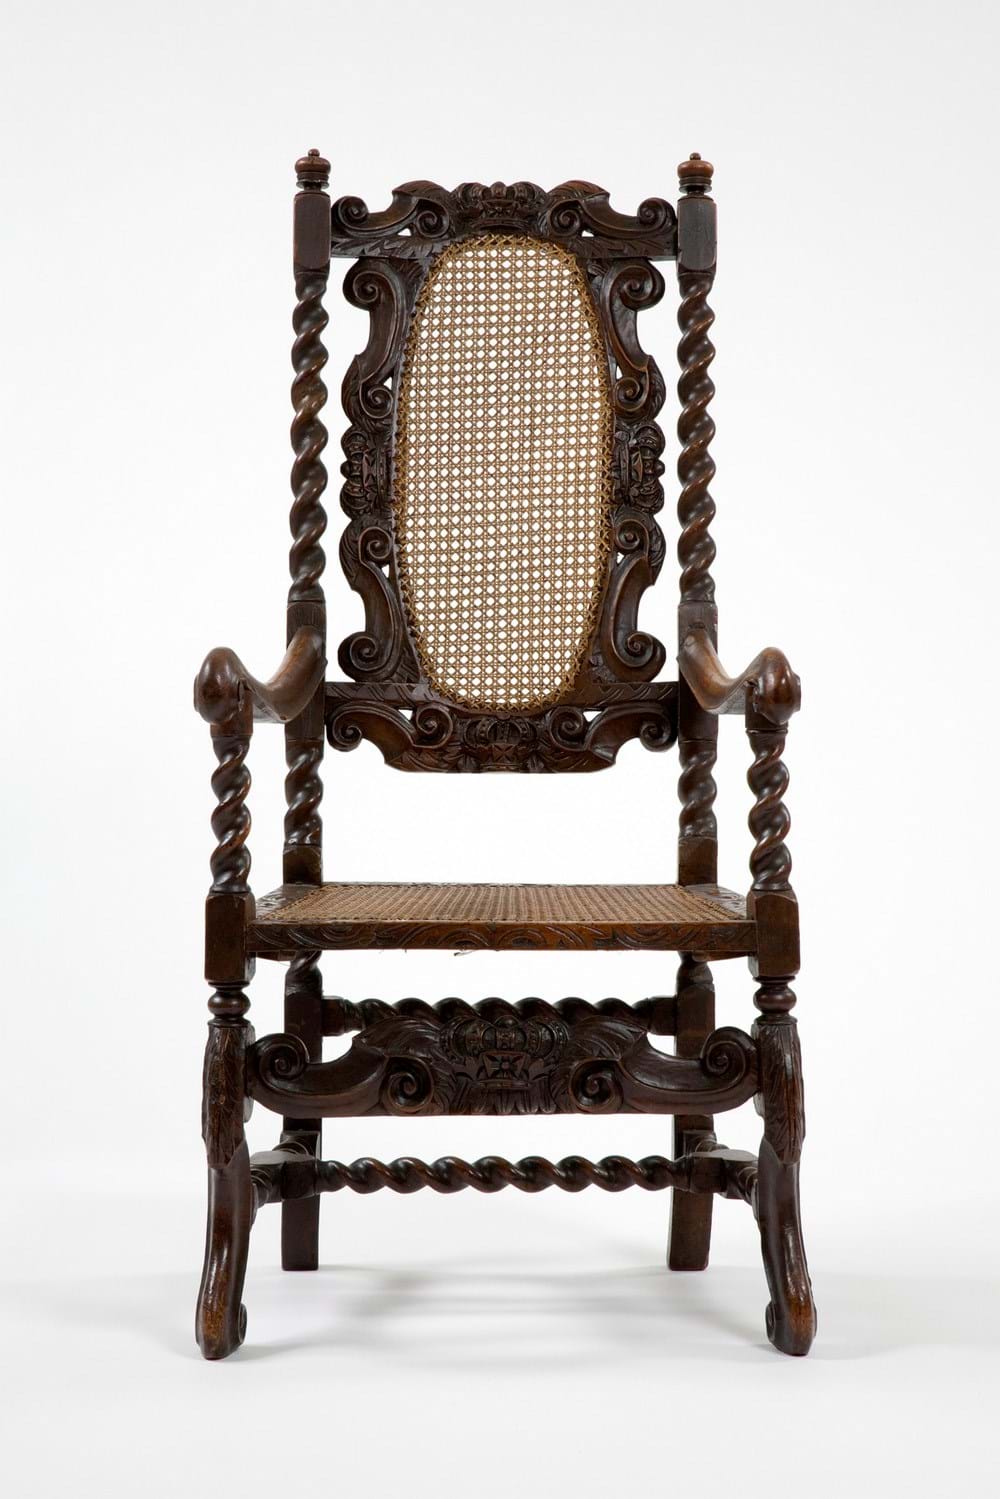 Wooden chair with woven back and base